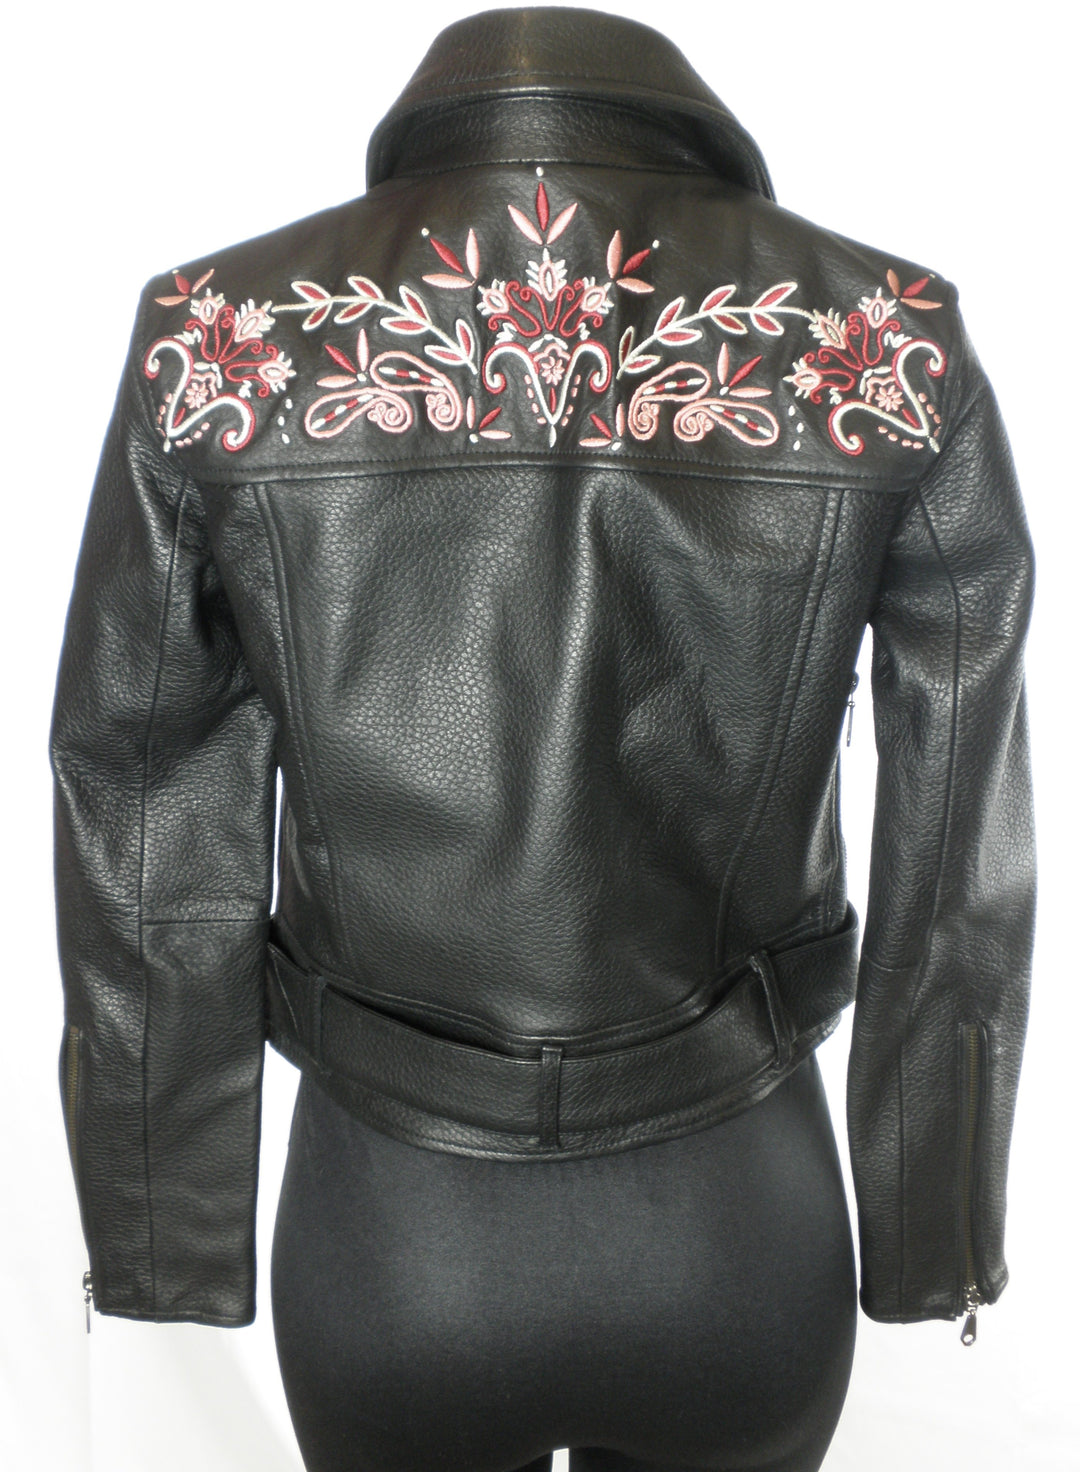 Rebecca Minkoff Floral Embroidered Leather Jacket - Size XXS, XS - The Fashion Foundation